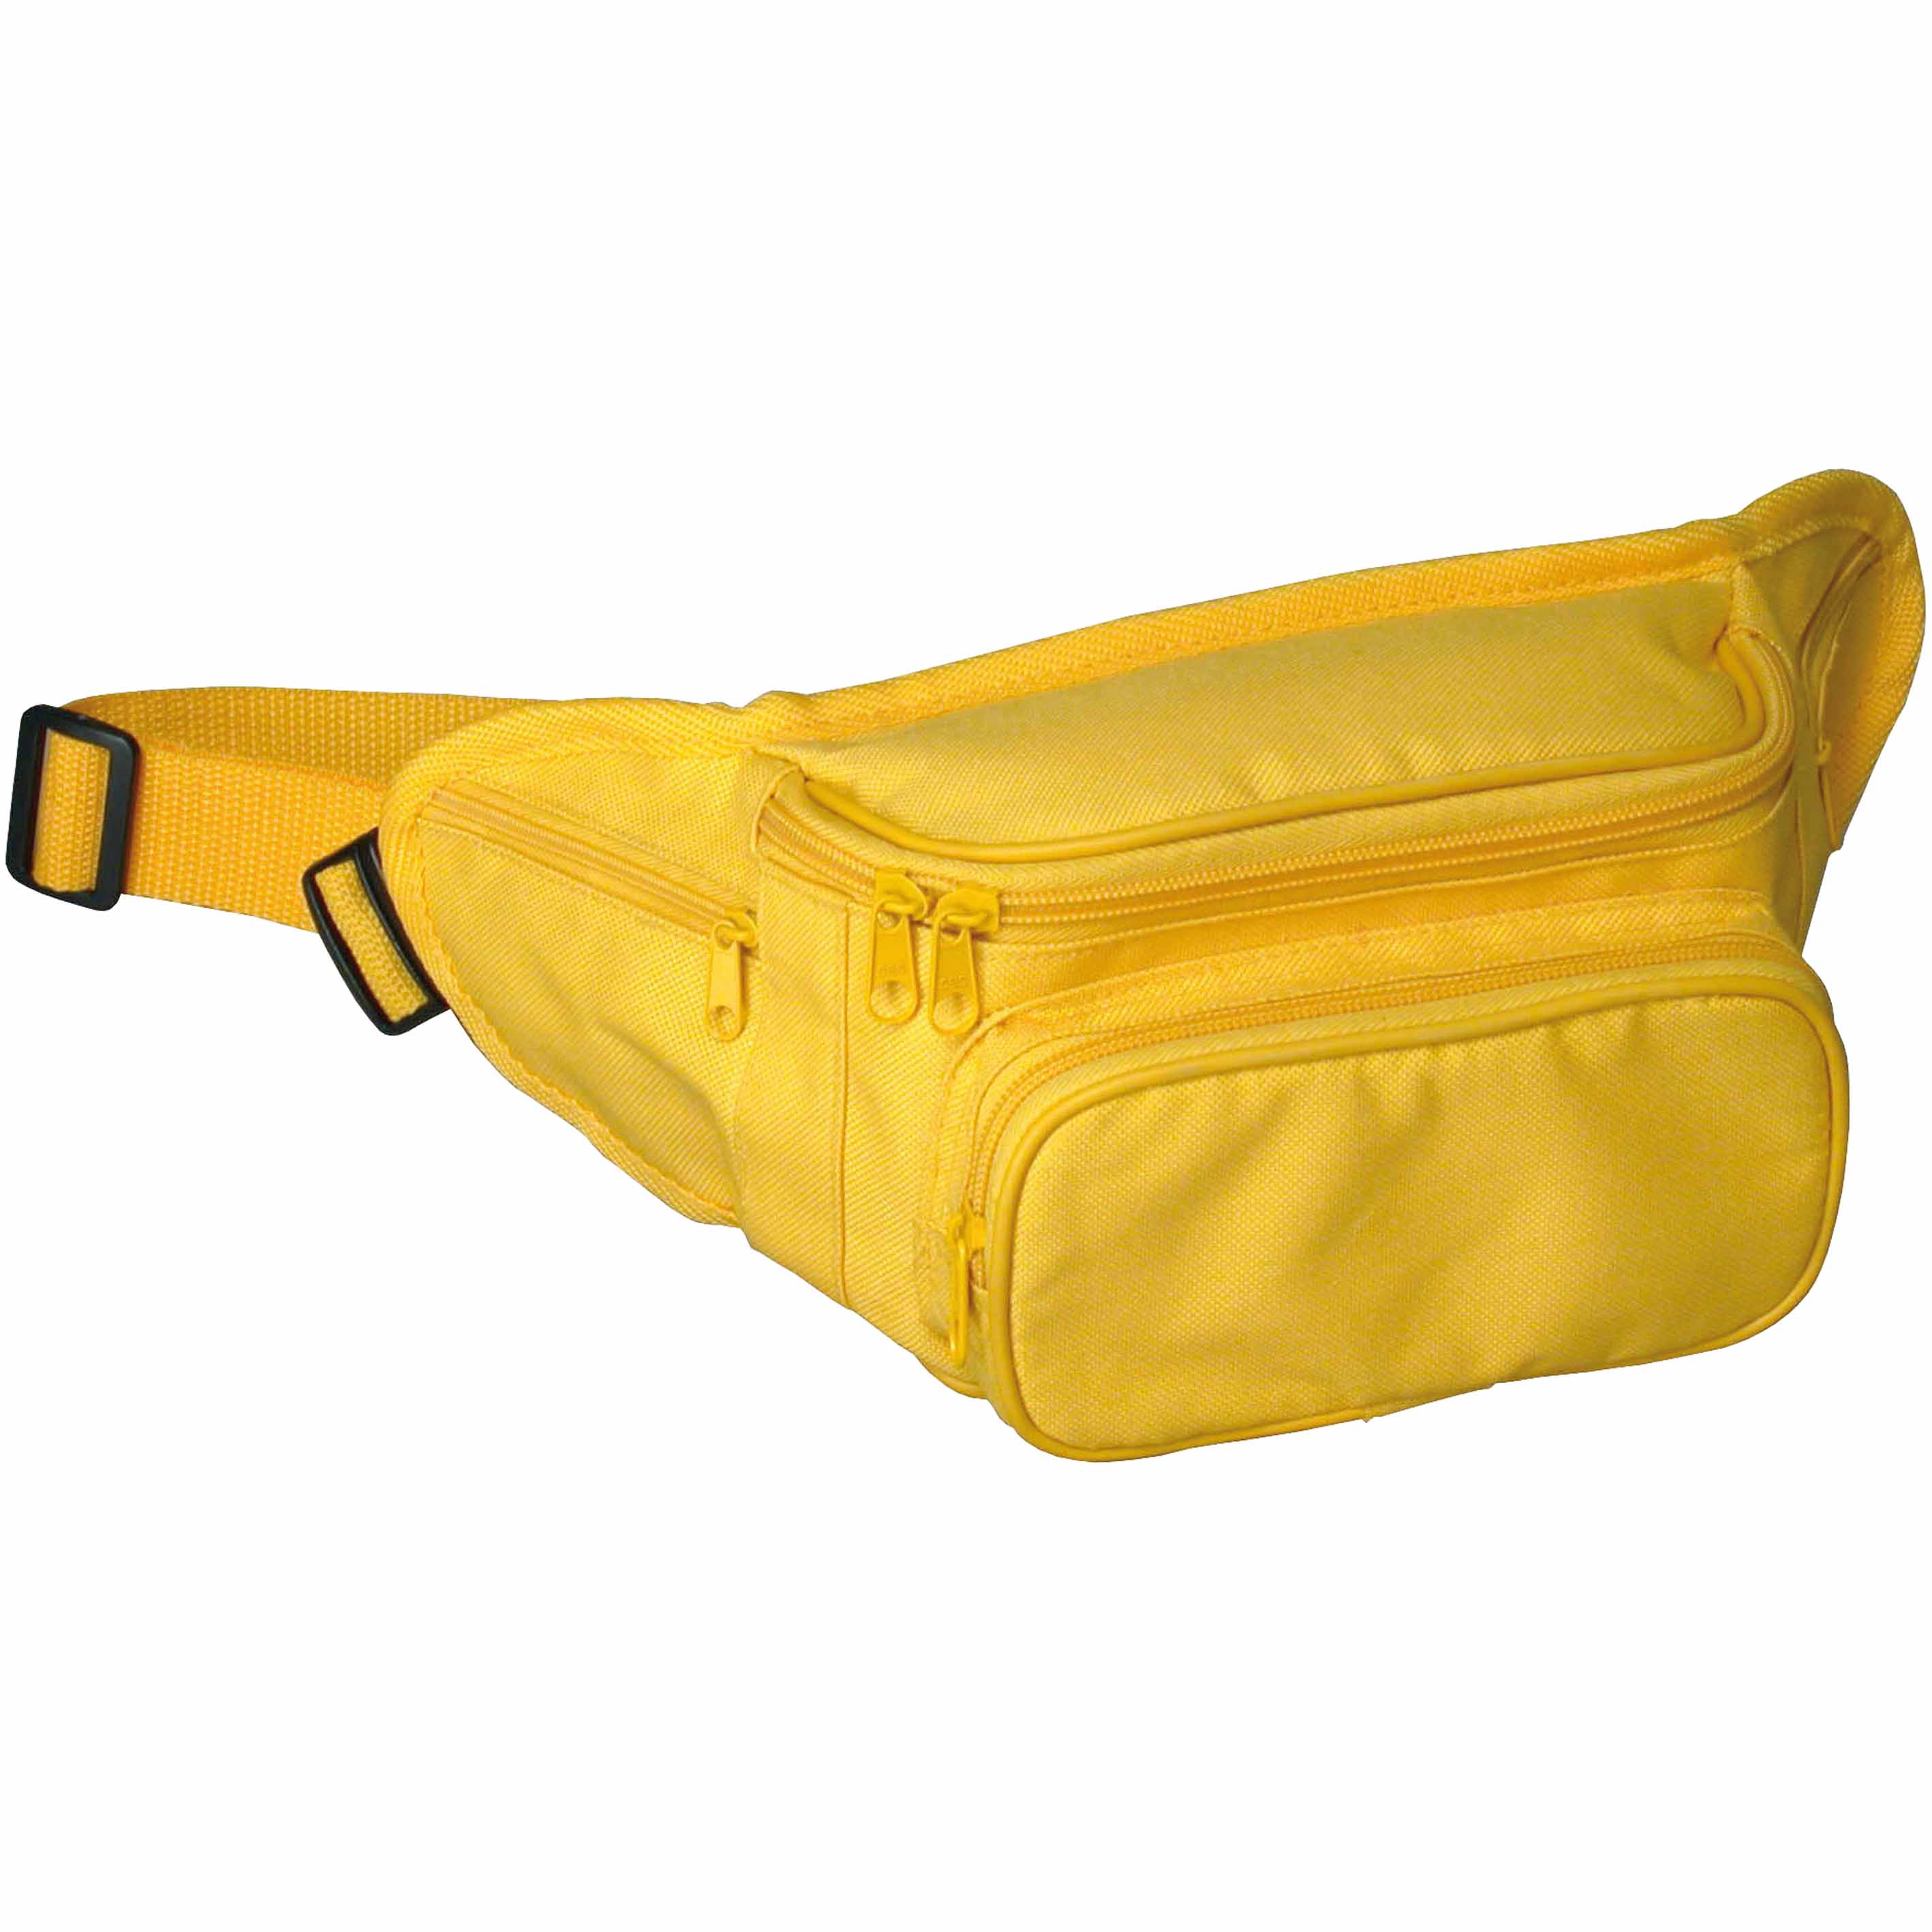 Polyester 5-pocket waist bag with adjustable waist strap and clip closure. Product size 35 X 14 X 12 CM